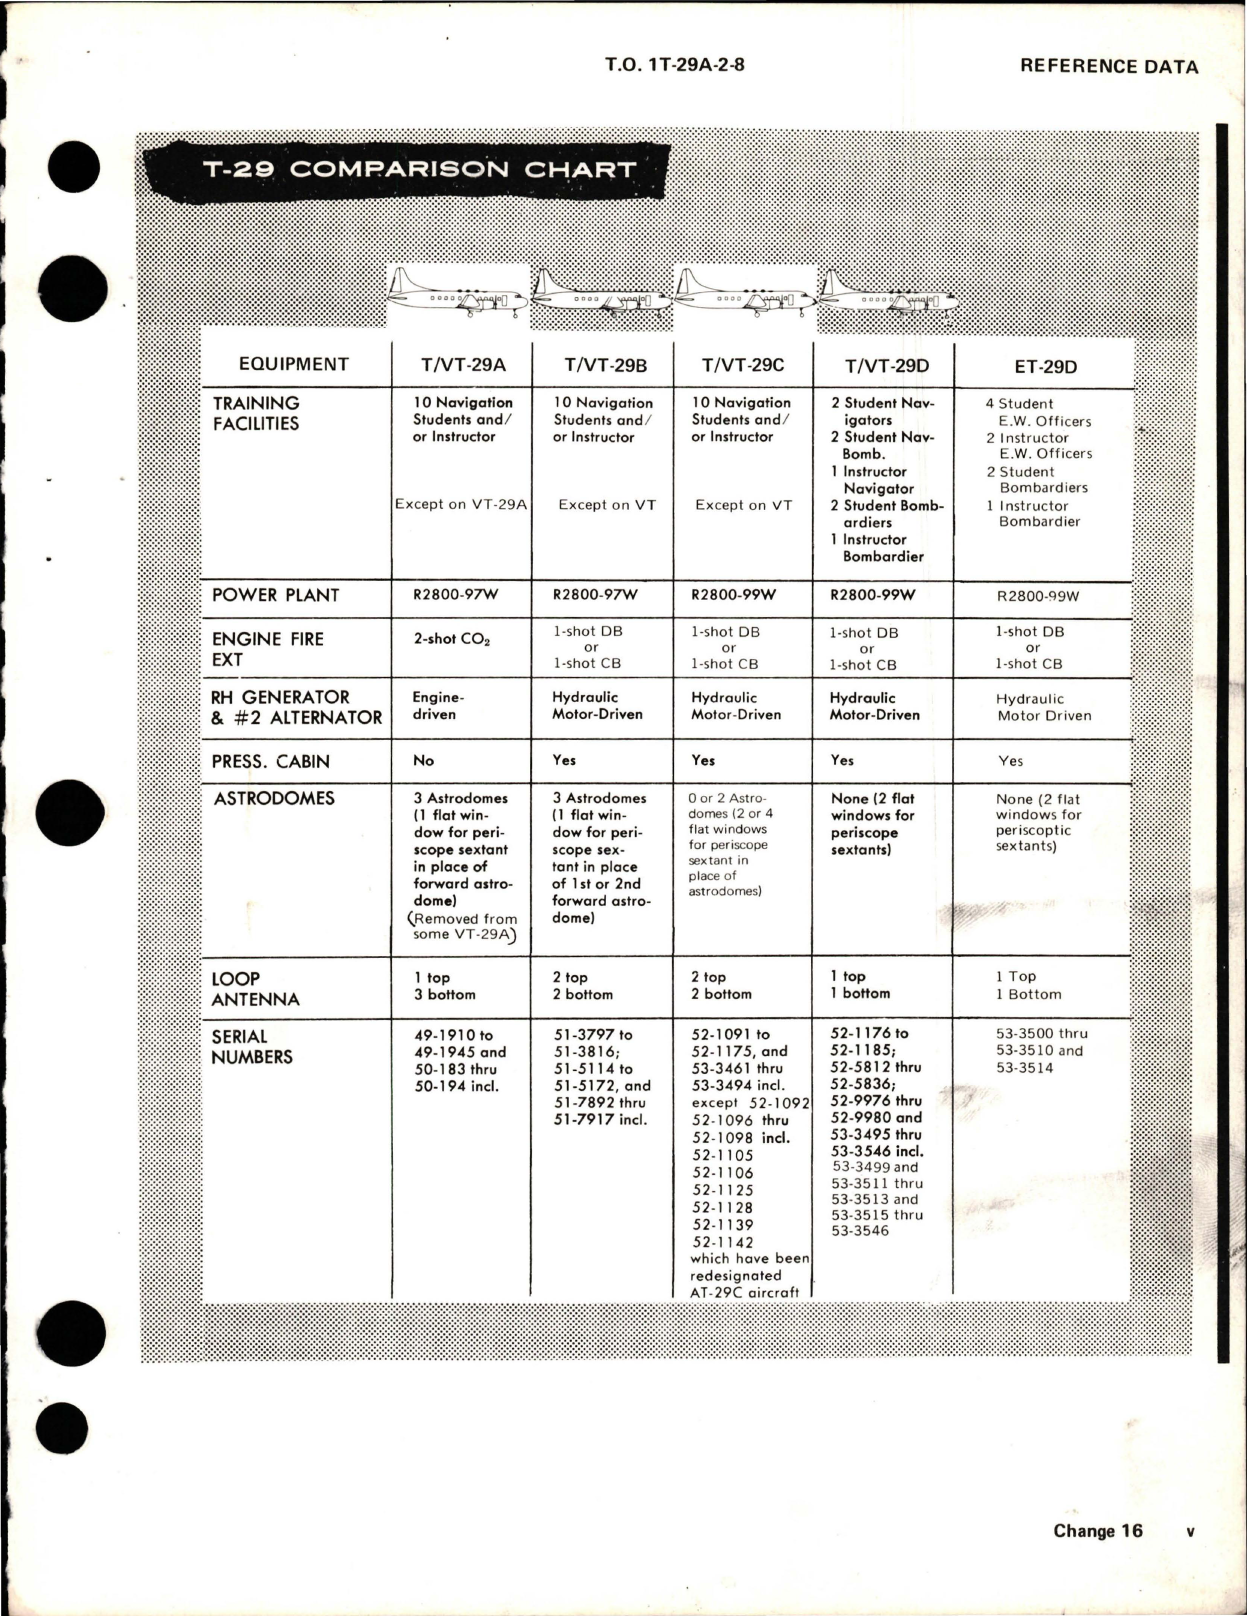 Sample page 7 from AirCorps Library document: Maintenance for Flight Control Systems, T-29A, T-29B, T-29C and T-29D